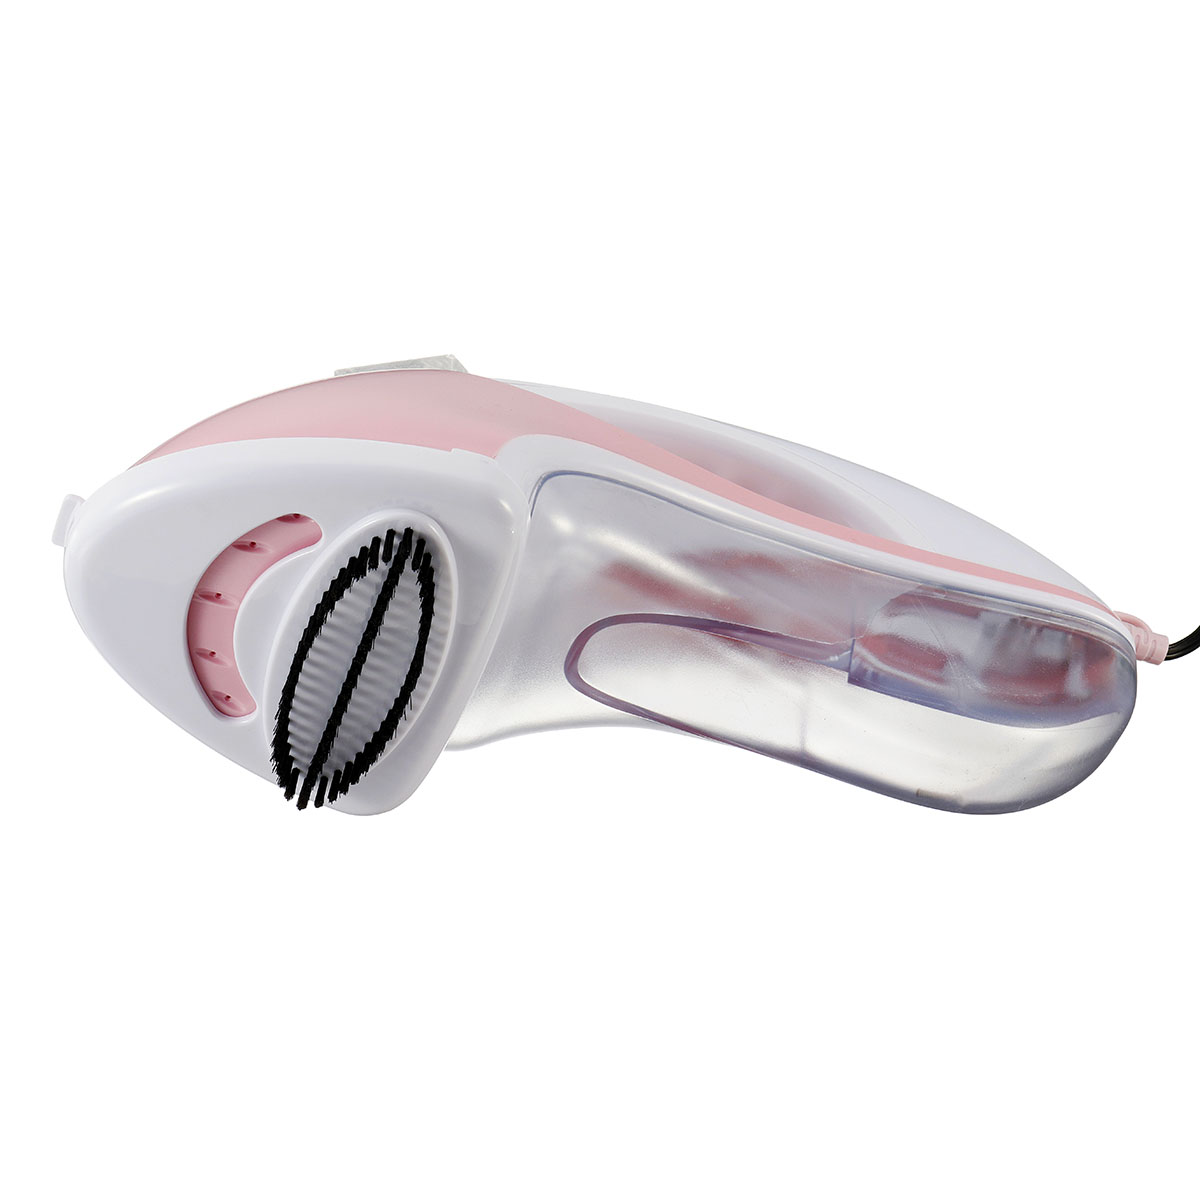 110V-1000W-Handheld-Electric-Steam-Iron-Fabric-Clothes-Garment-Steamer-Dry-Flat-1500430-7